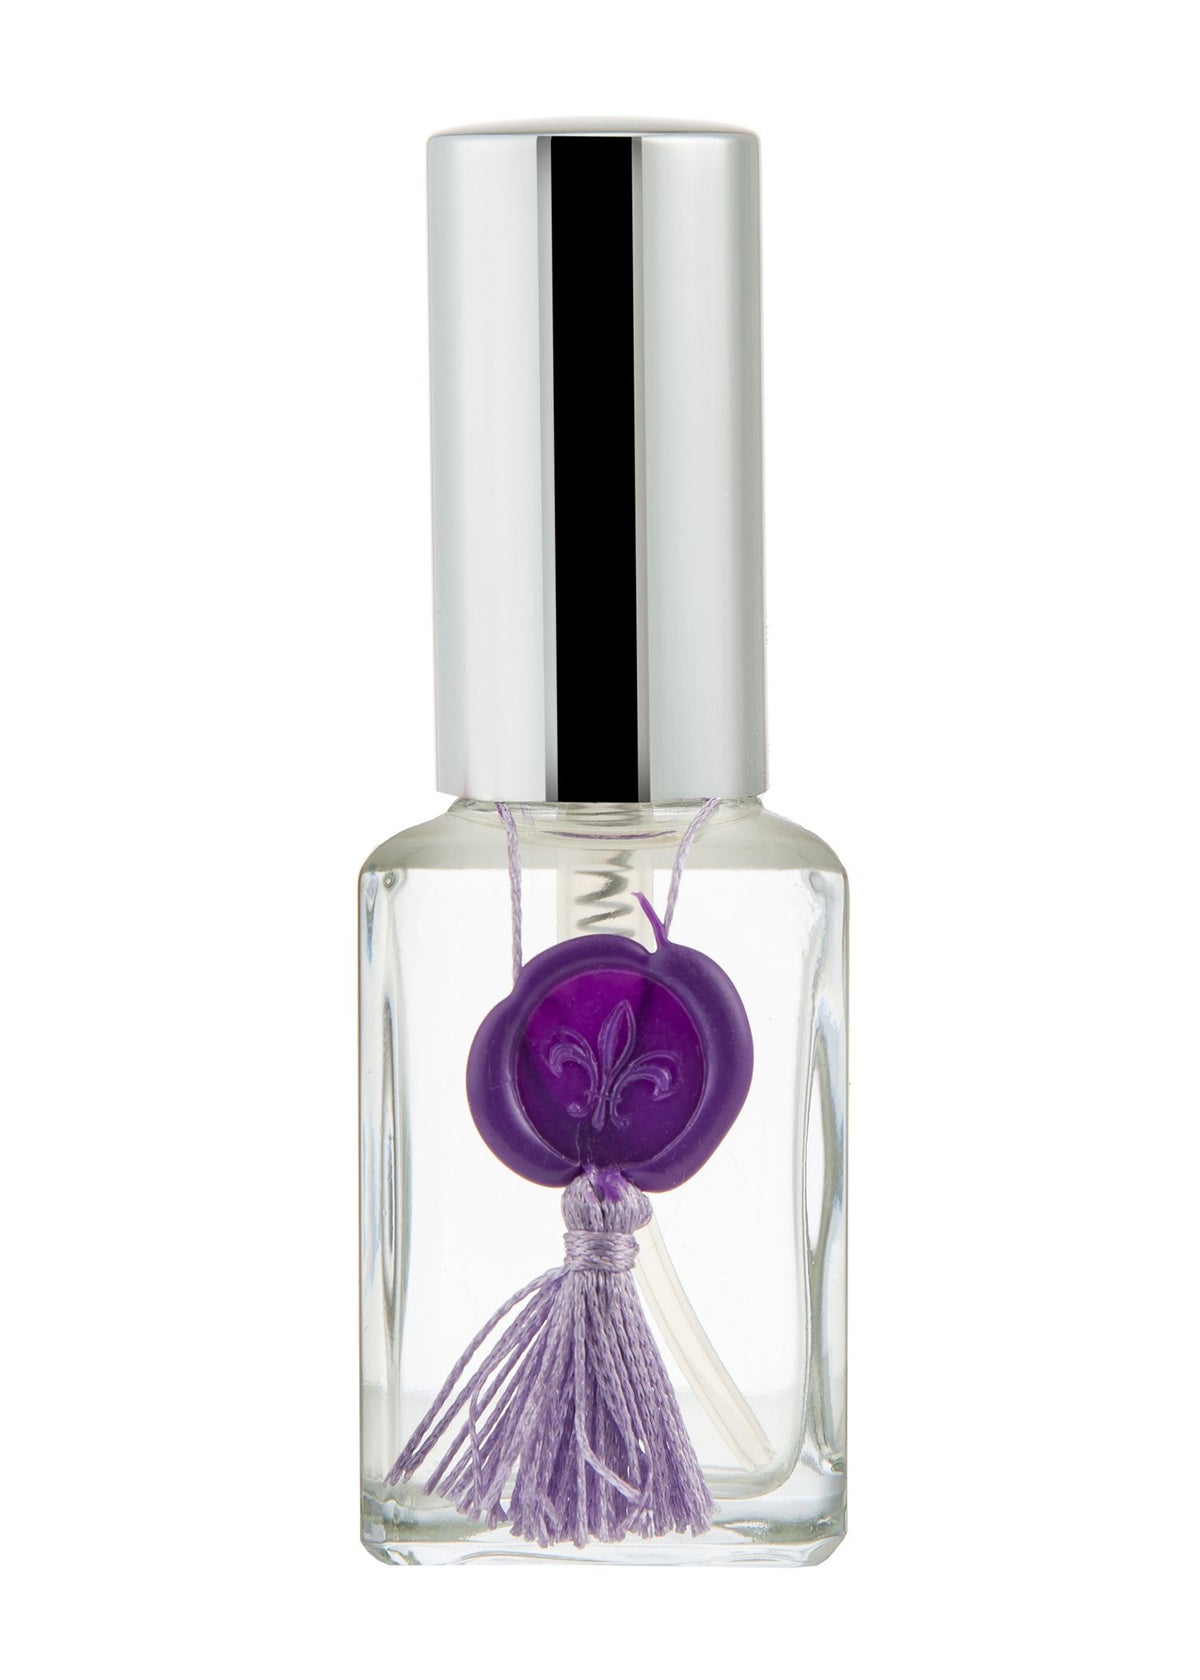 A Sonoma Lavender Essential Oil Spray bottle with a silver cap, adorned with a purple tassel and a matching purple charm with a lavender oil design on a white background.